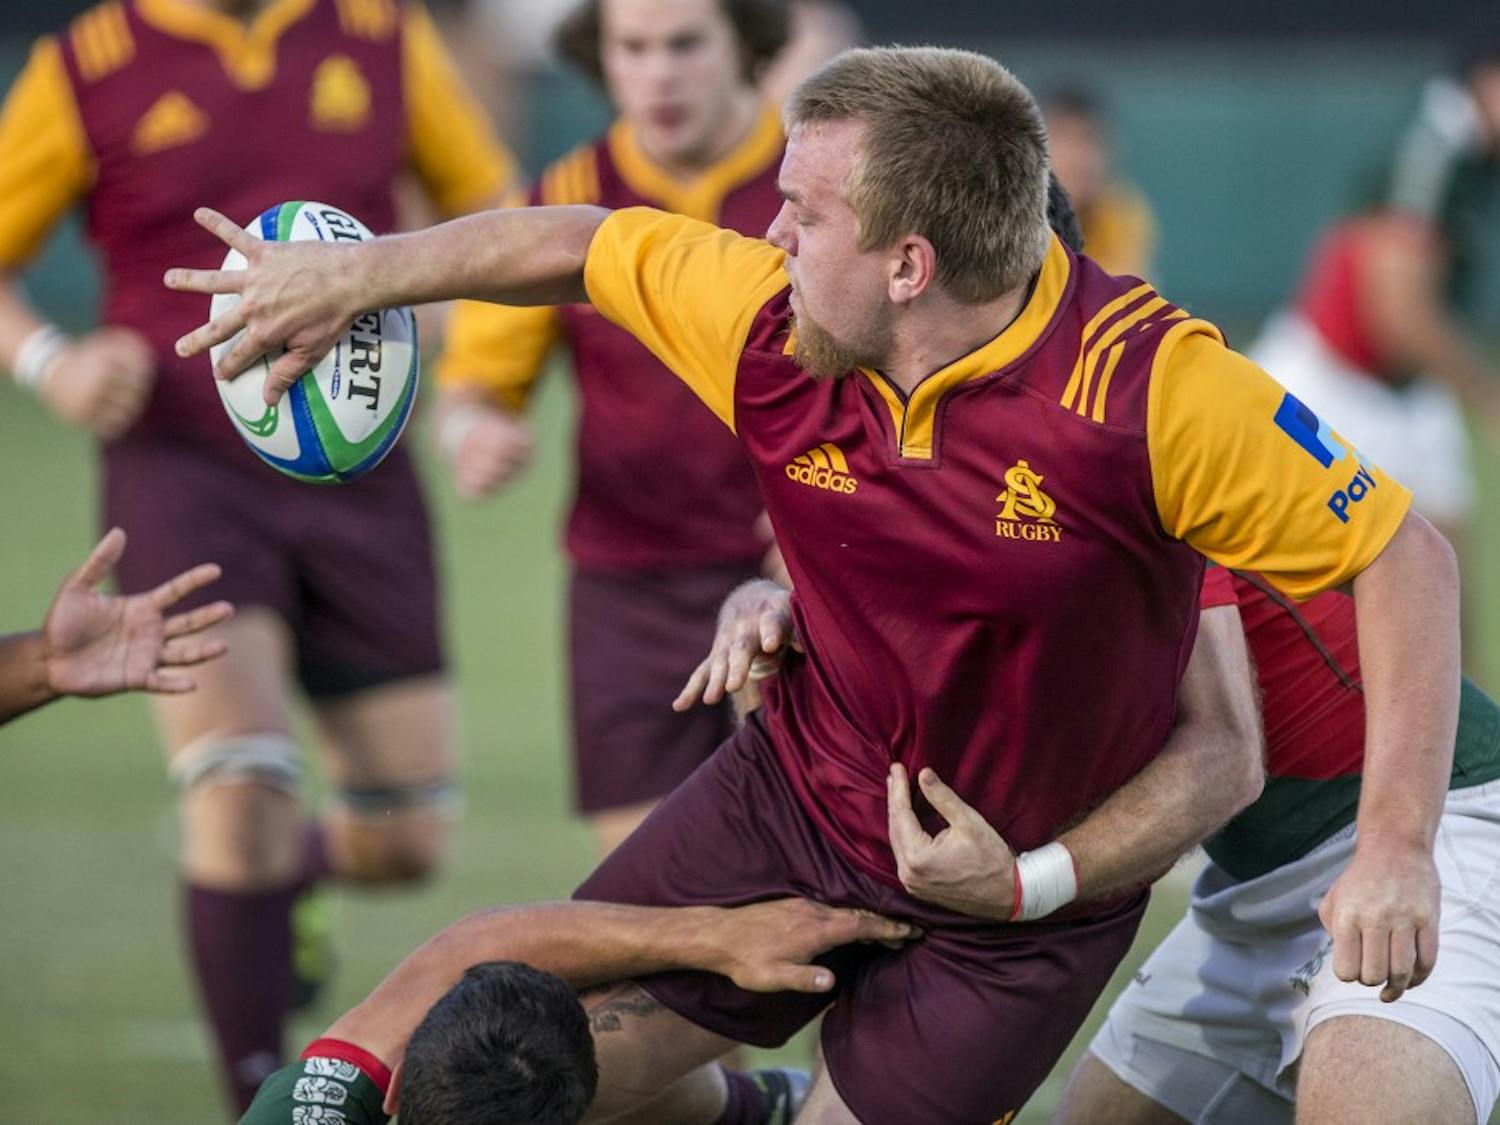 The ASU rugby team plays against the Mexico national rugby team at the Fiesta Bowl Rugby and Balloon Classic at Scottsdale Stadium in Scottsdale, Arizona, on Saturday April 23, 2016. Mexico beat the ASU team, 30-23.